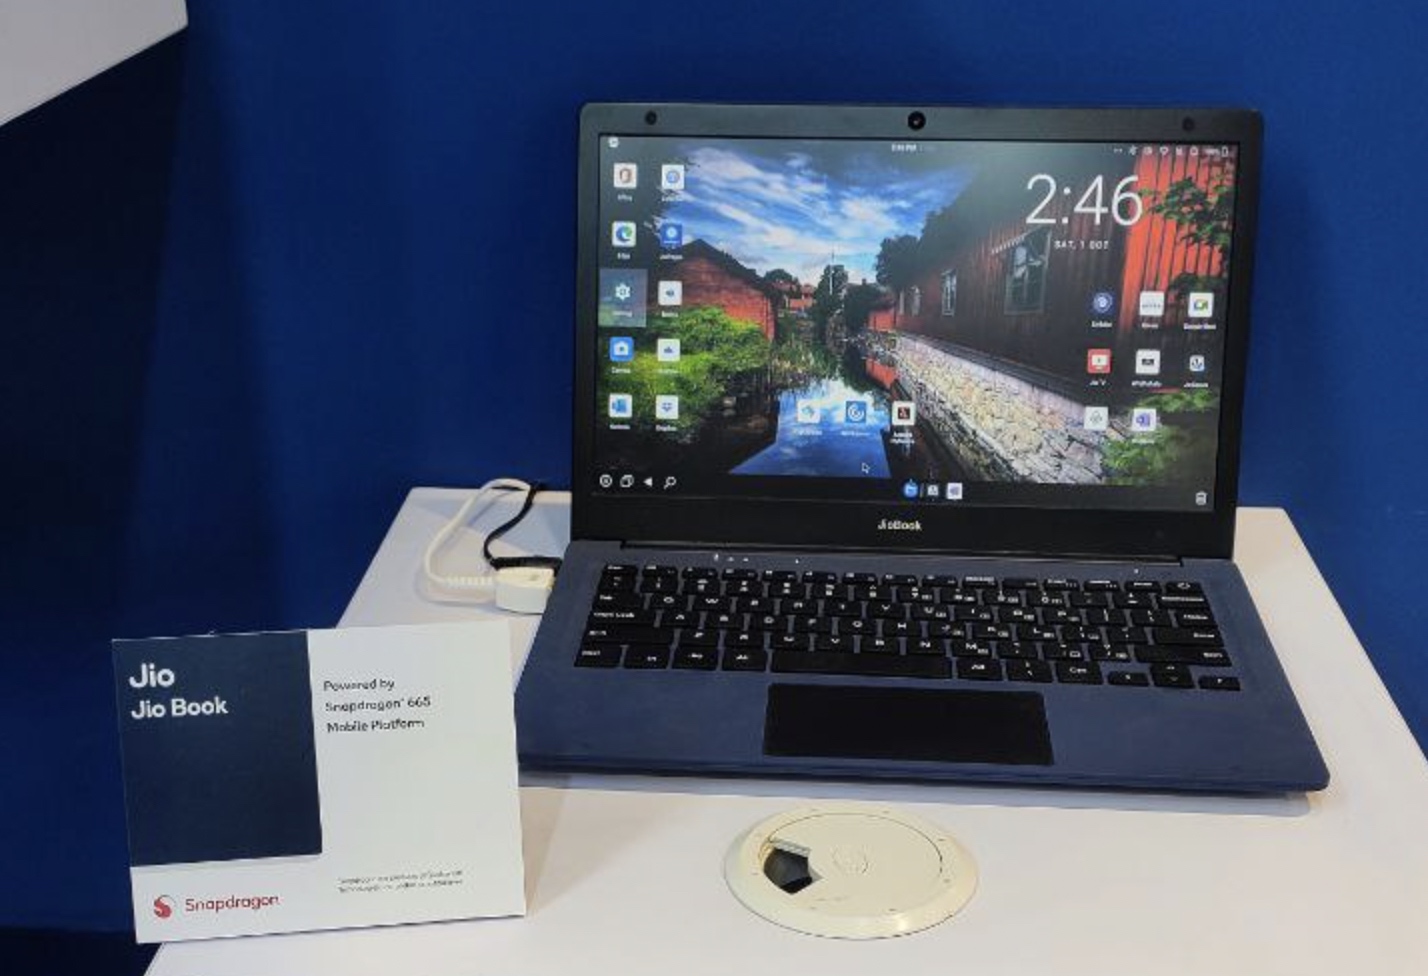 Reliance Jio launches its first-ever JioBook laptop with Snapdragon 665 SoC